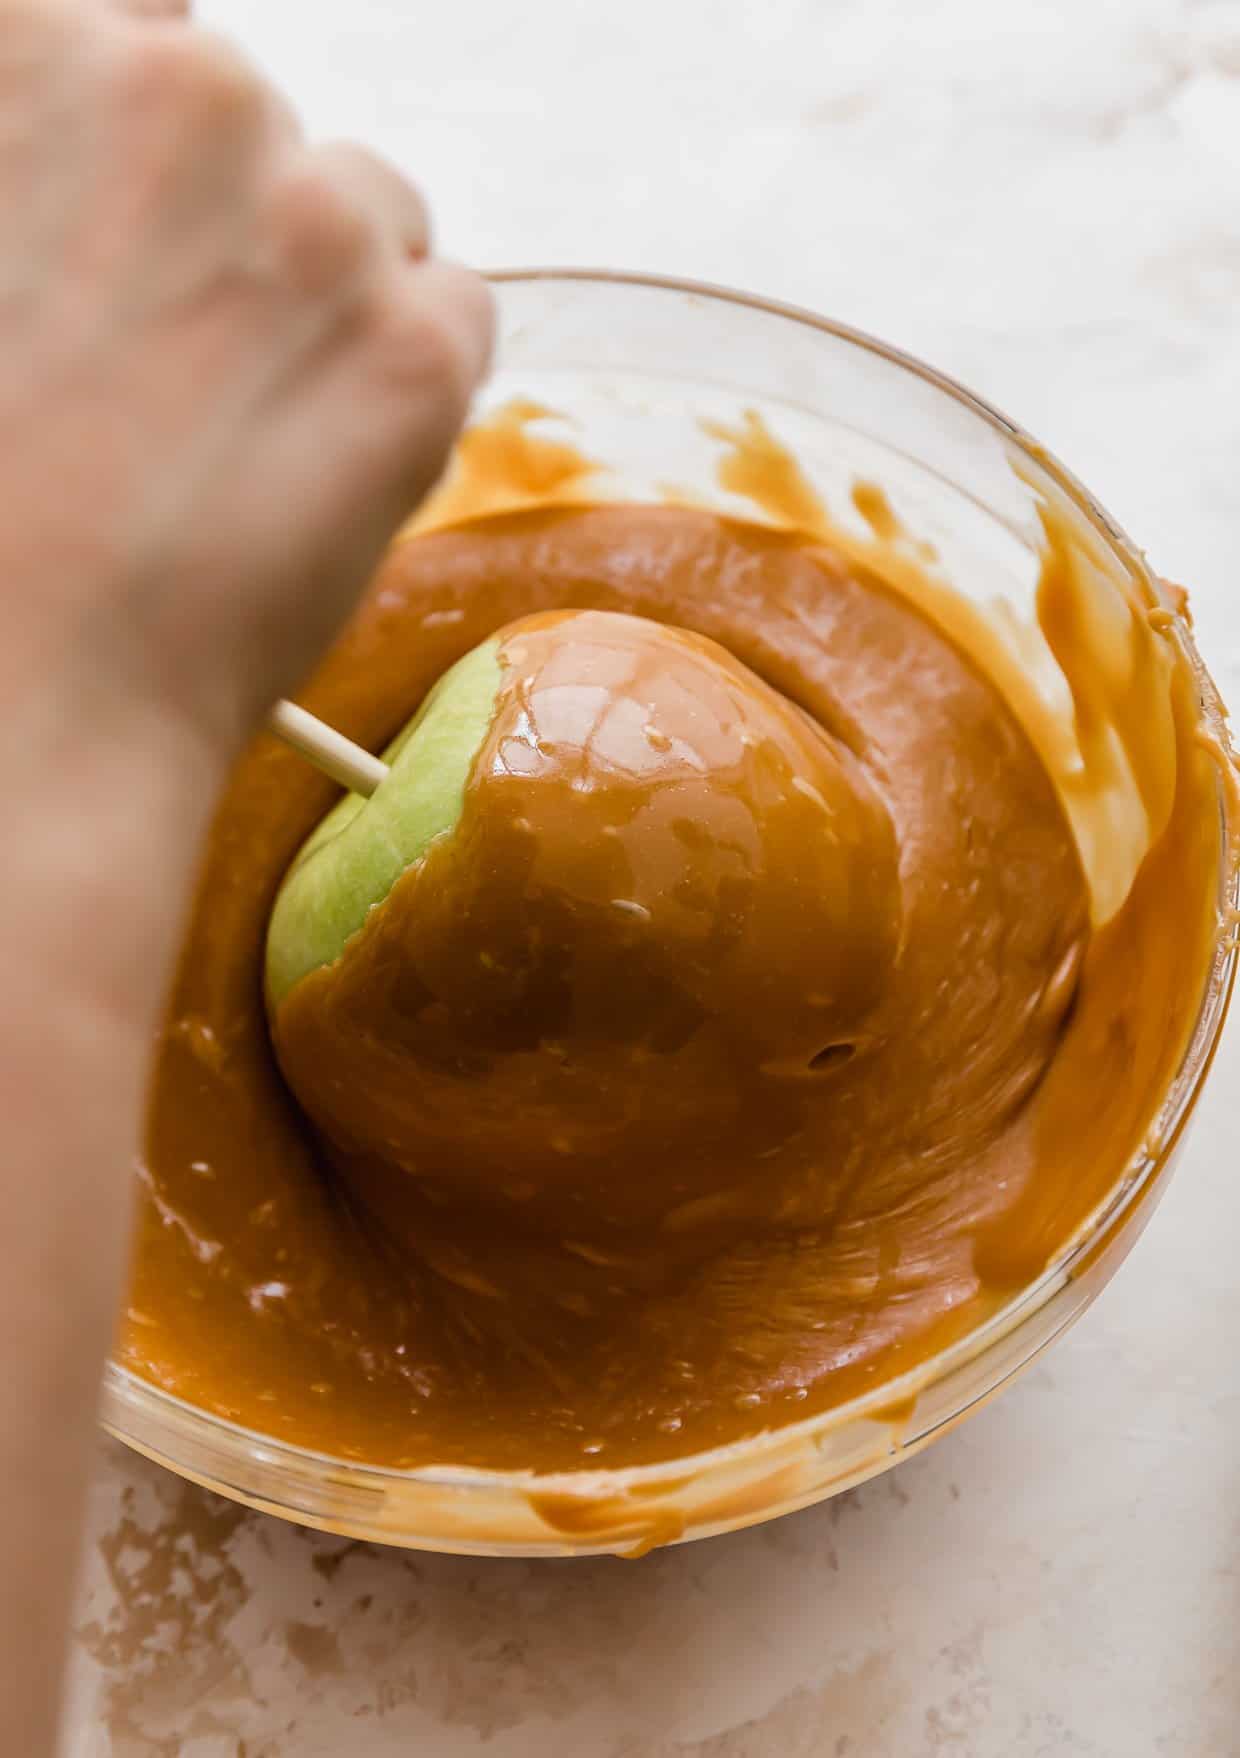 A hand twisting a green Granny Smith apple in a bowl of caramel.